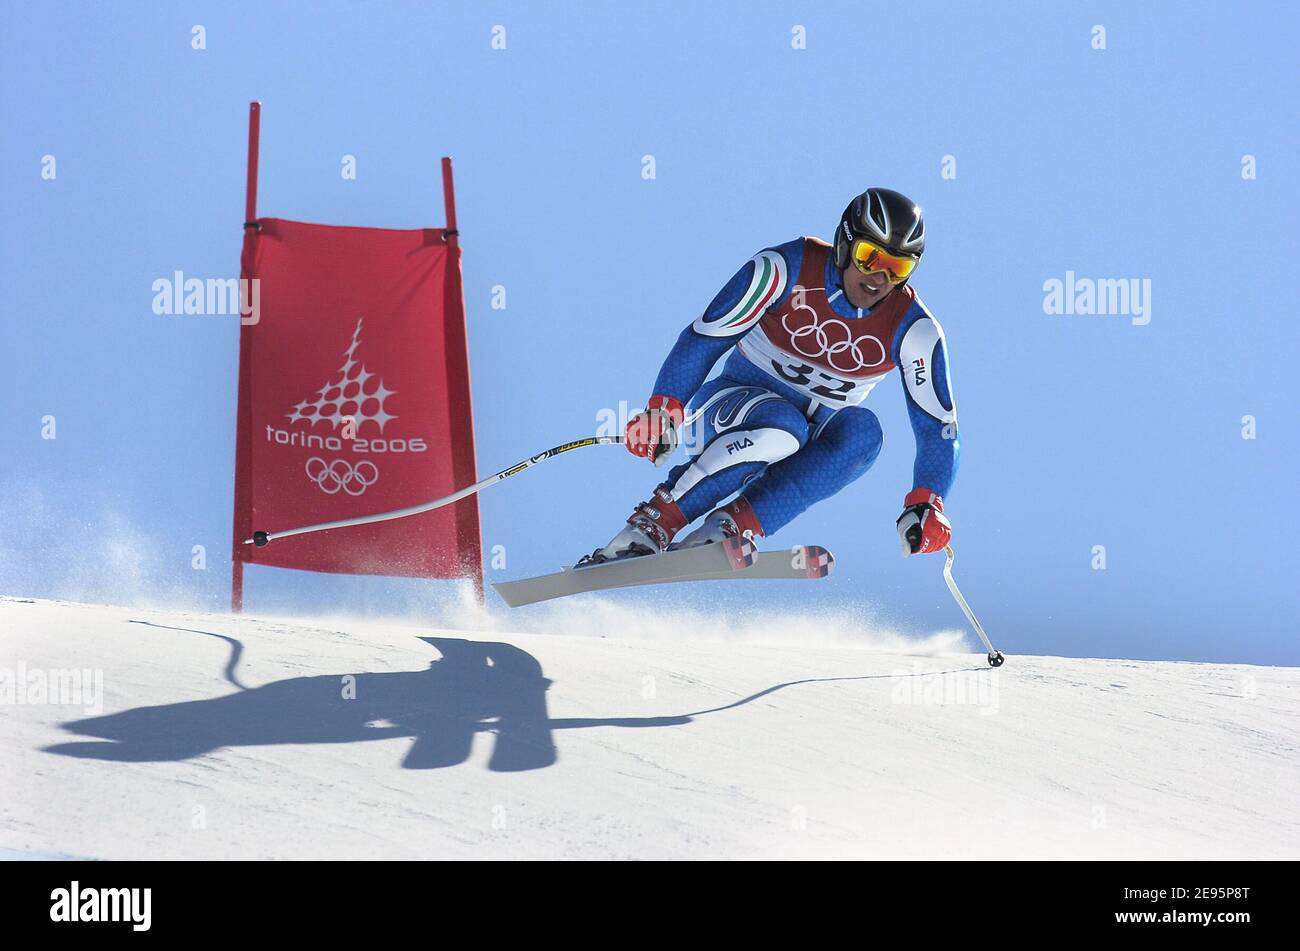 Italy's Giorgio Rocca during the training run for the men's downhill at the Turin 2006 Winter Olympic Games in Sestriere Borgata, Italy, on February 10, 2006. Photo by Gouhier-Nebinger-Orban/ABACAPRESS.COM Stock Photo